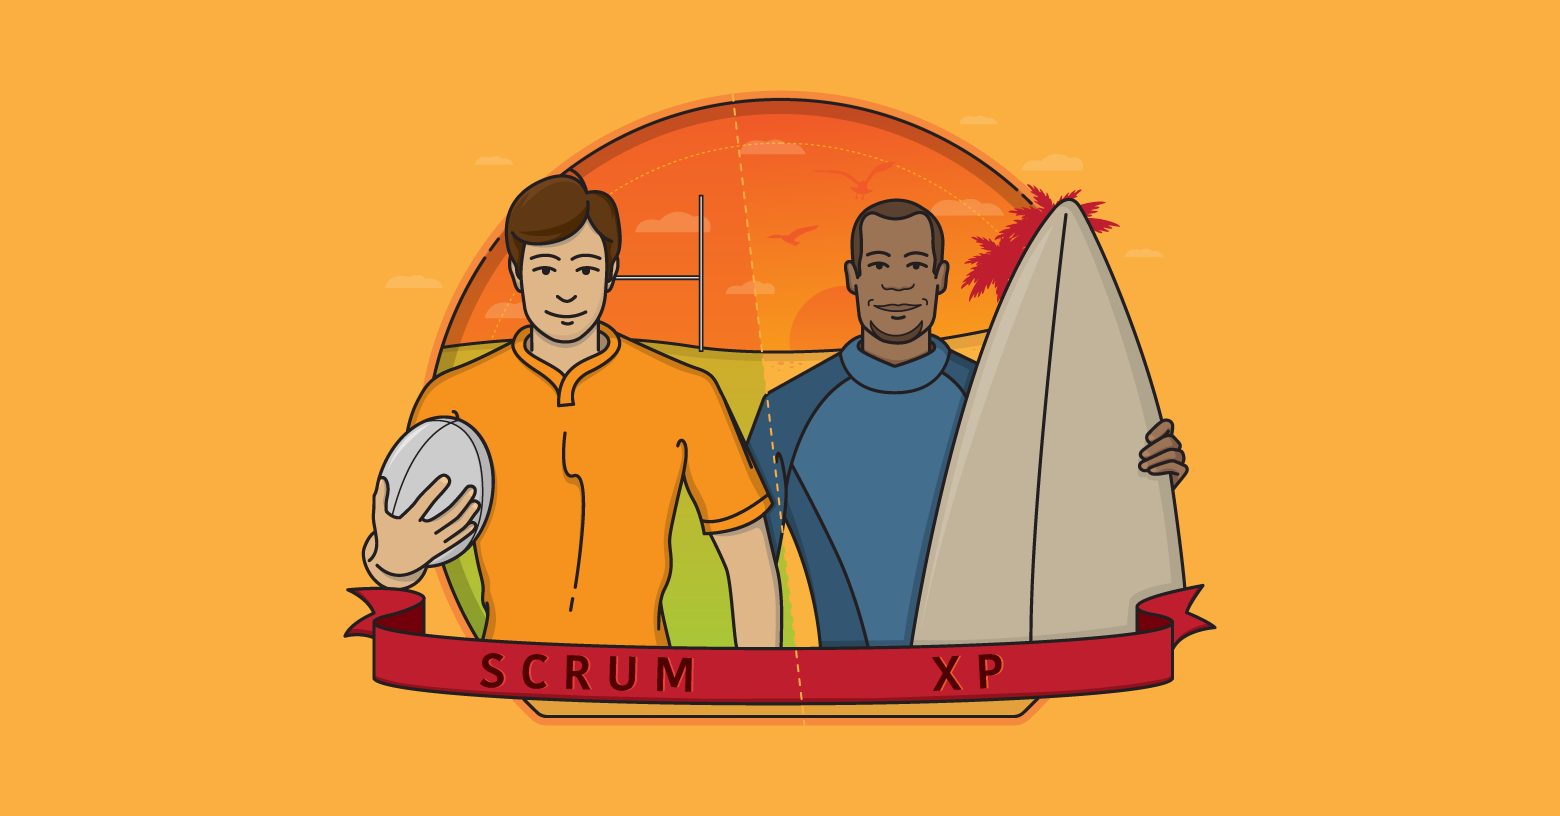 Differences Between Scrum and Extreme Programming